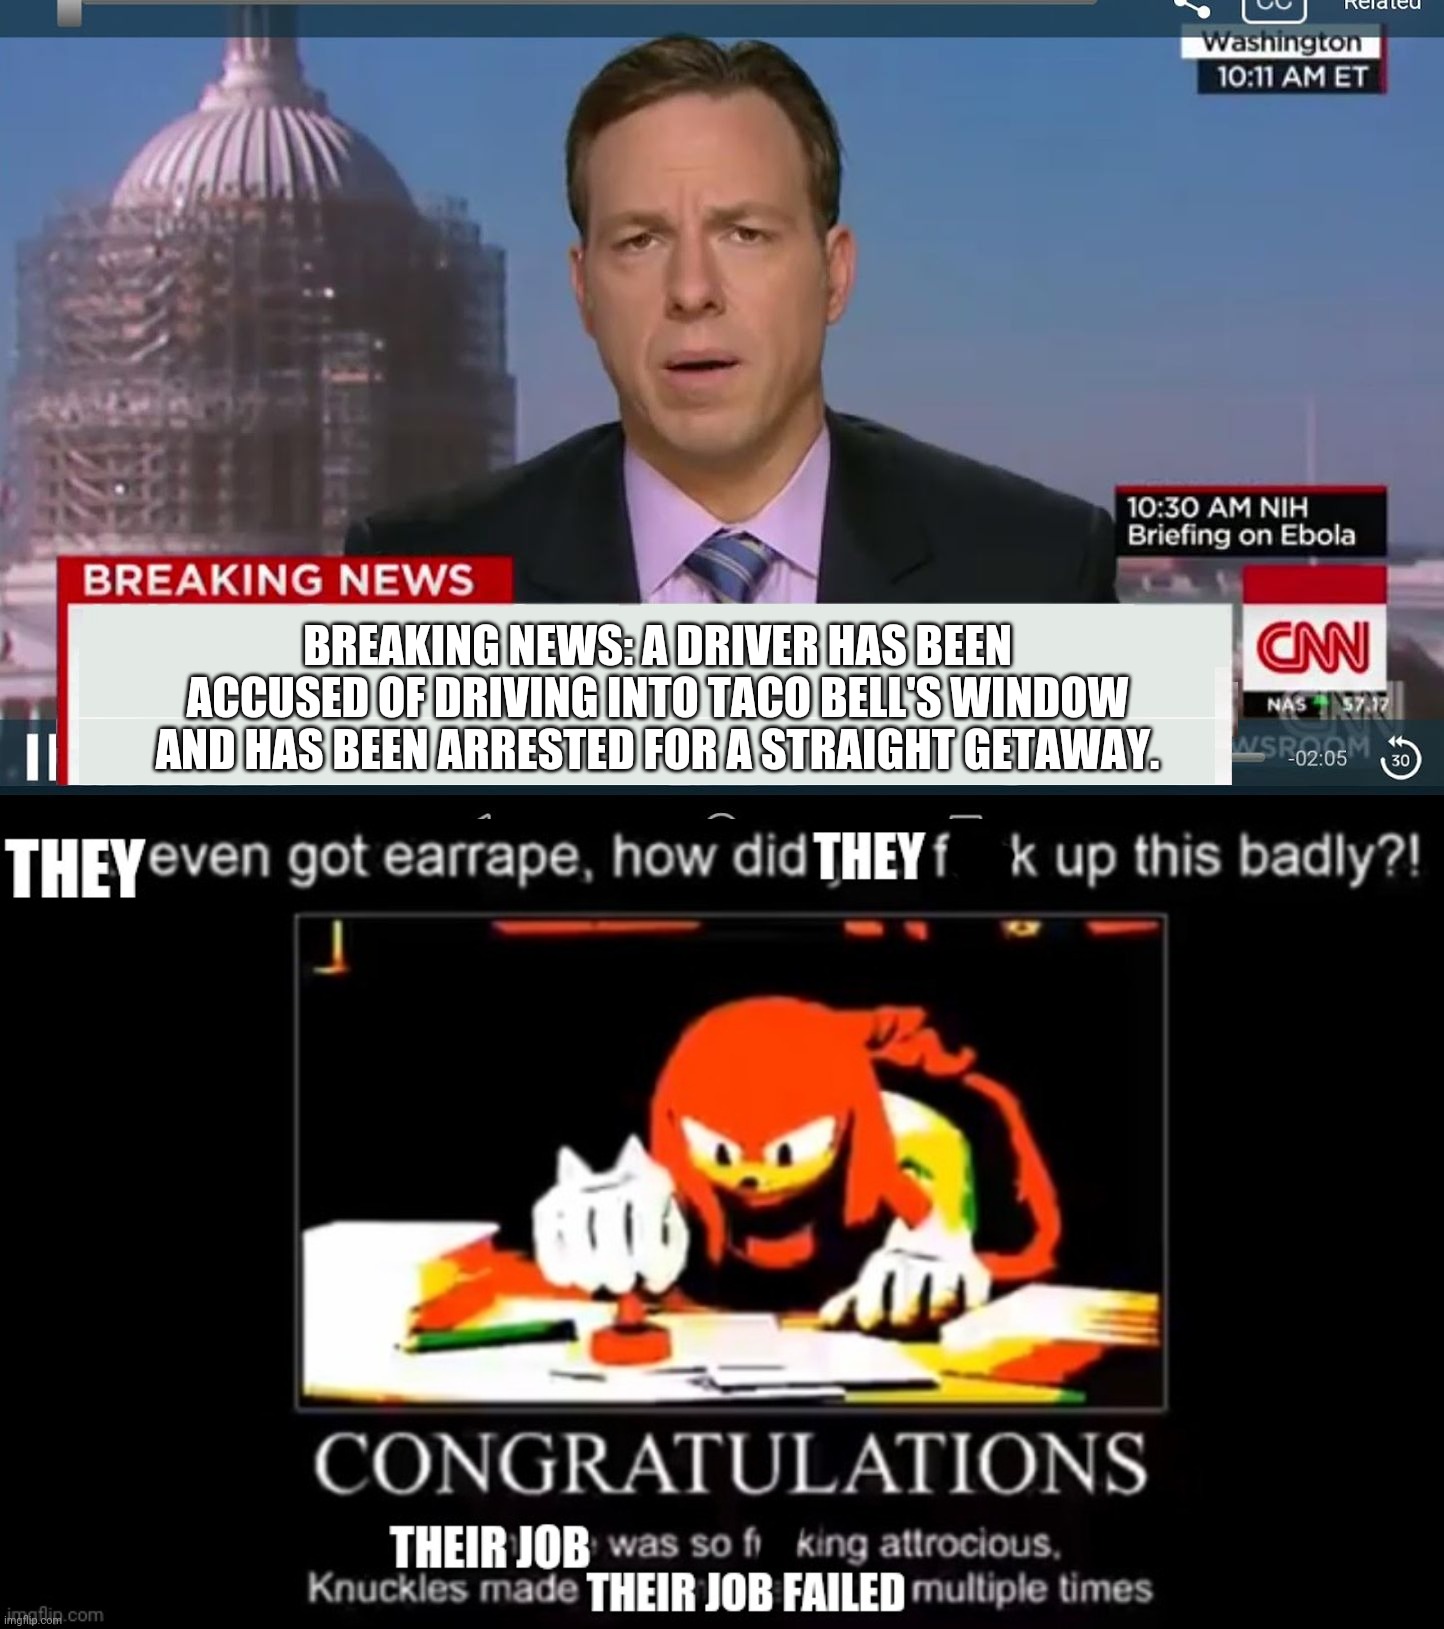 BREAKING NEWS: A DRIVER HAS BEEN ACCUSED OF DRIVING INTO TACO BELL'S WINDOW AND HAS BEEN ARRESTED FOR A STRAIGHT GETAWAY. | image tagged in cnn breaking news template,knuckles meme illegal failing job | made w/ Imgflip meme maker